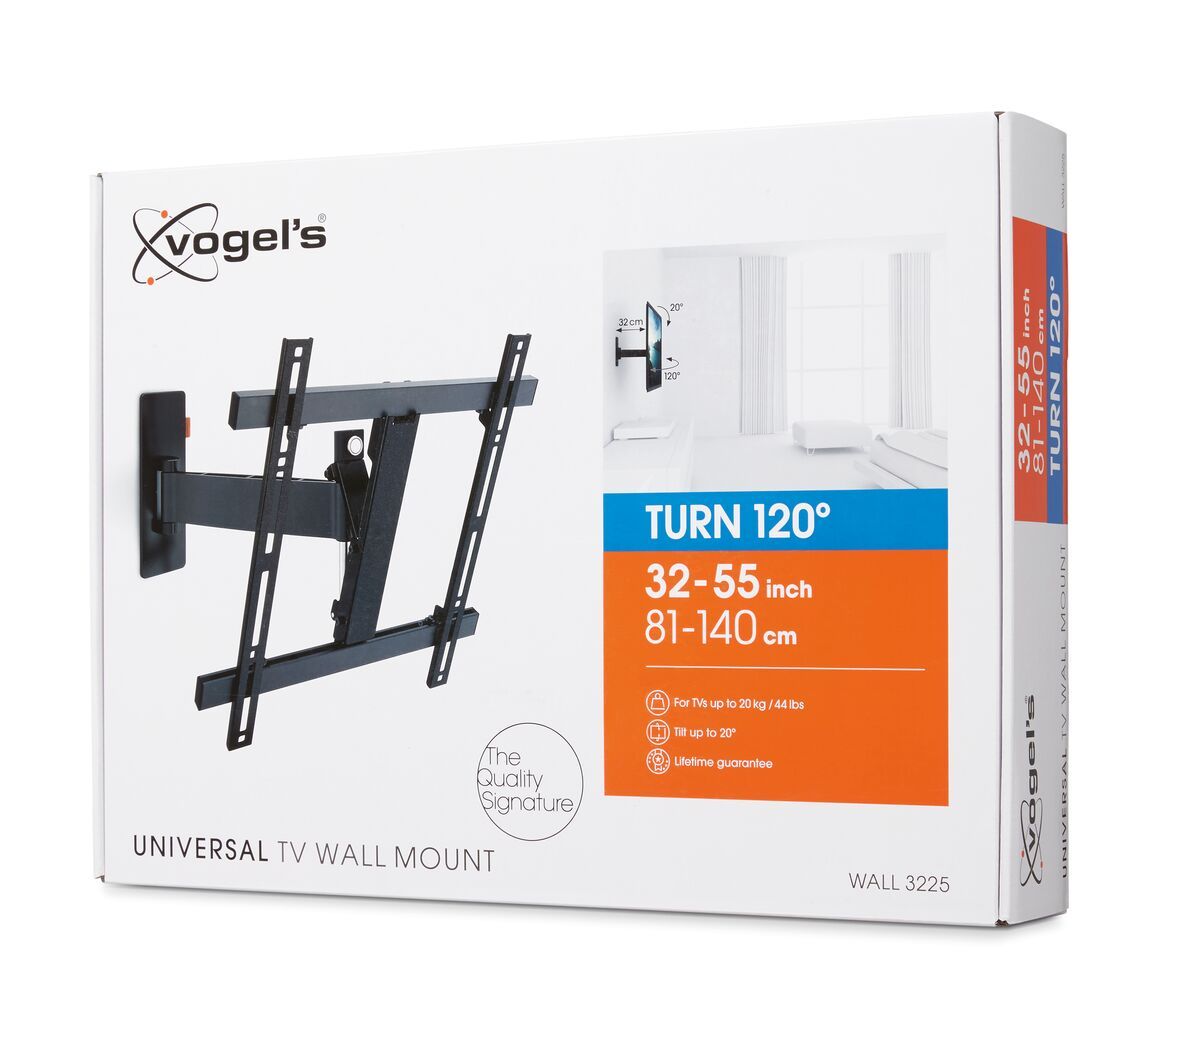 Vogel's WALL 3225 Full-Motion TV Wall Mount - Suitable for 32 up to 55 inch TVs - Motion (up to 120°) - Tilt up to 20° - Pack shot 3D